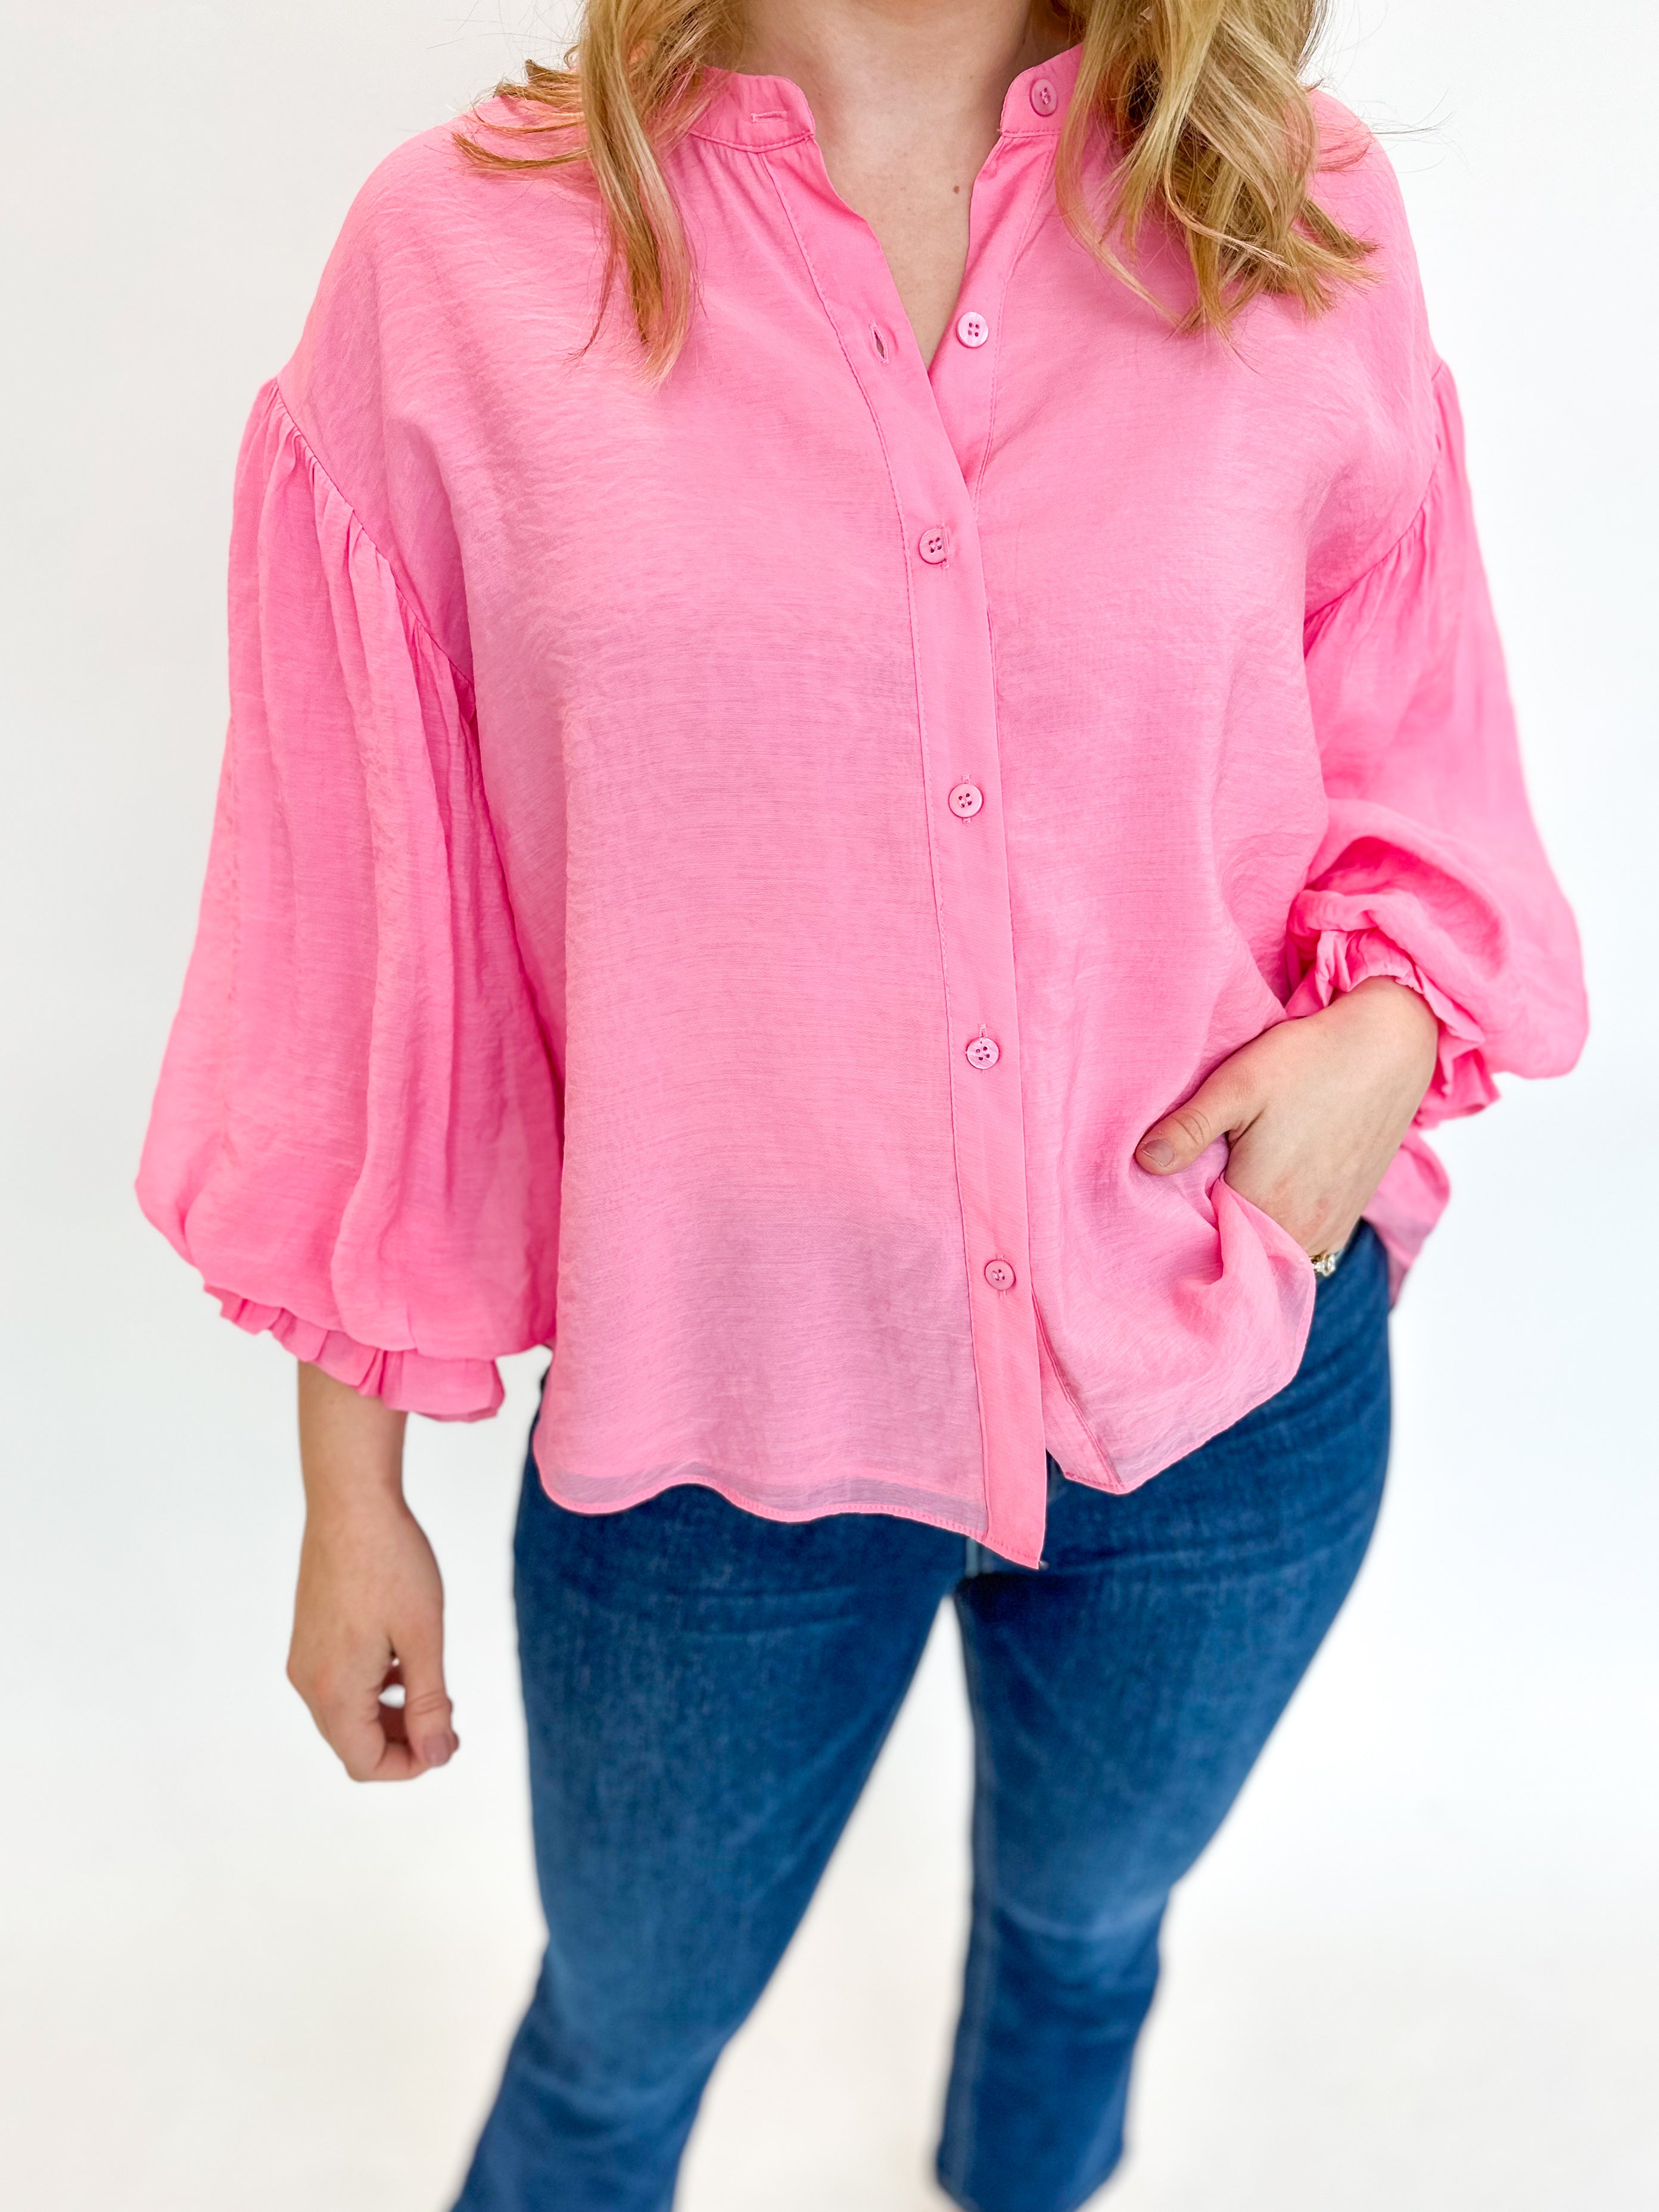 Classic Cut Blouse - Pink-200 Fashion Blouses-FATE-July & June Women's Fashion Boutique Located in San Antonio, Texas